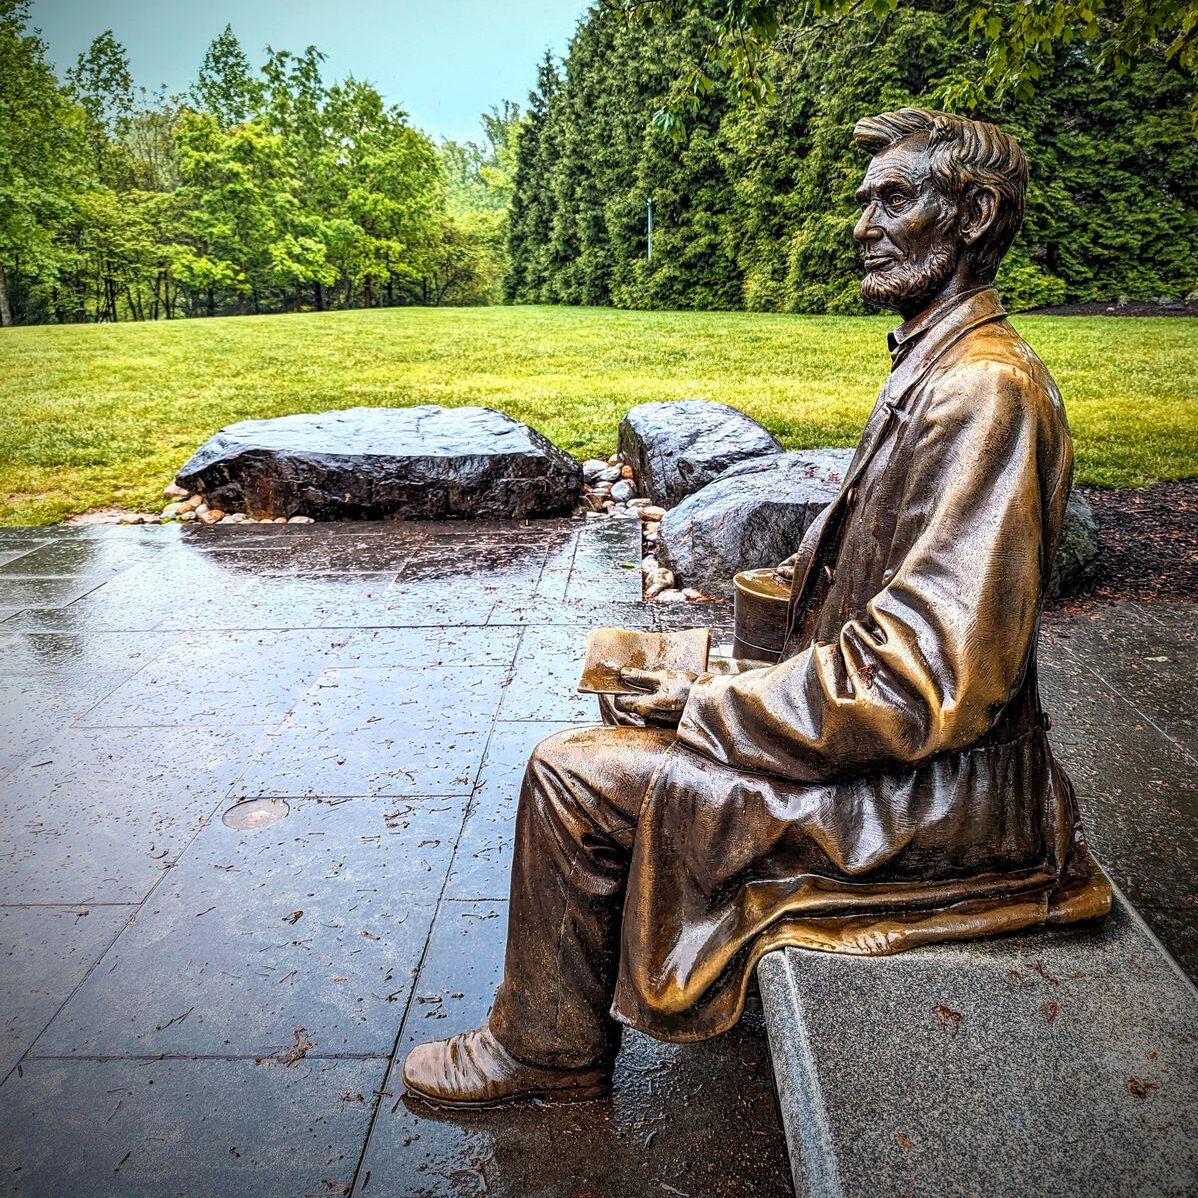 A bronze statue of Abraham Lincoln seated on a stone bench, holding a book on his lap, located in a serene outdoor setting. The statue is surrounded by lush green grass and trees, with large rocks positioned nearby on a wet stone pathway, adding to the tranquil ambiance.